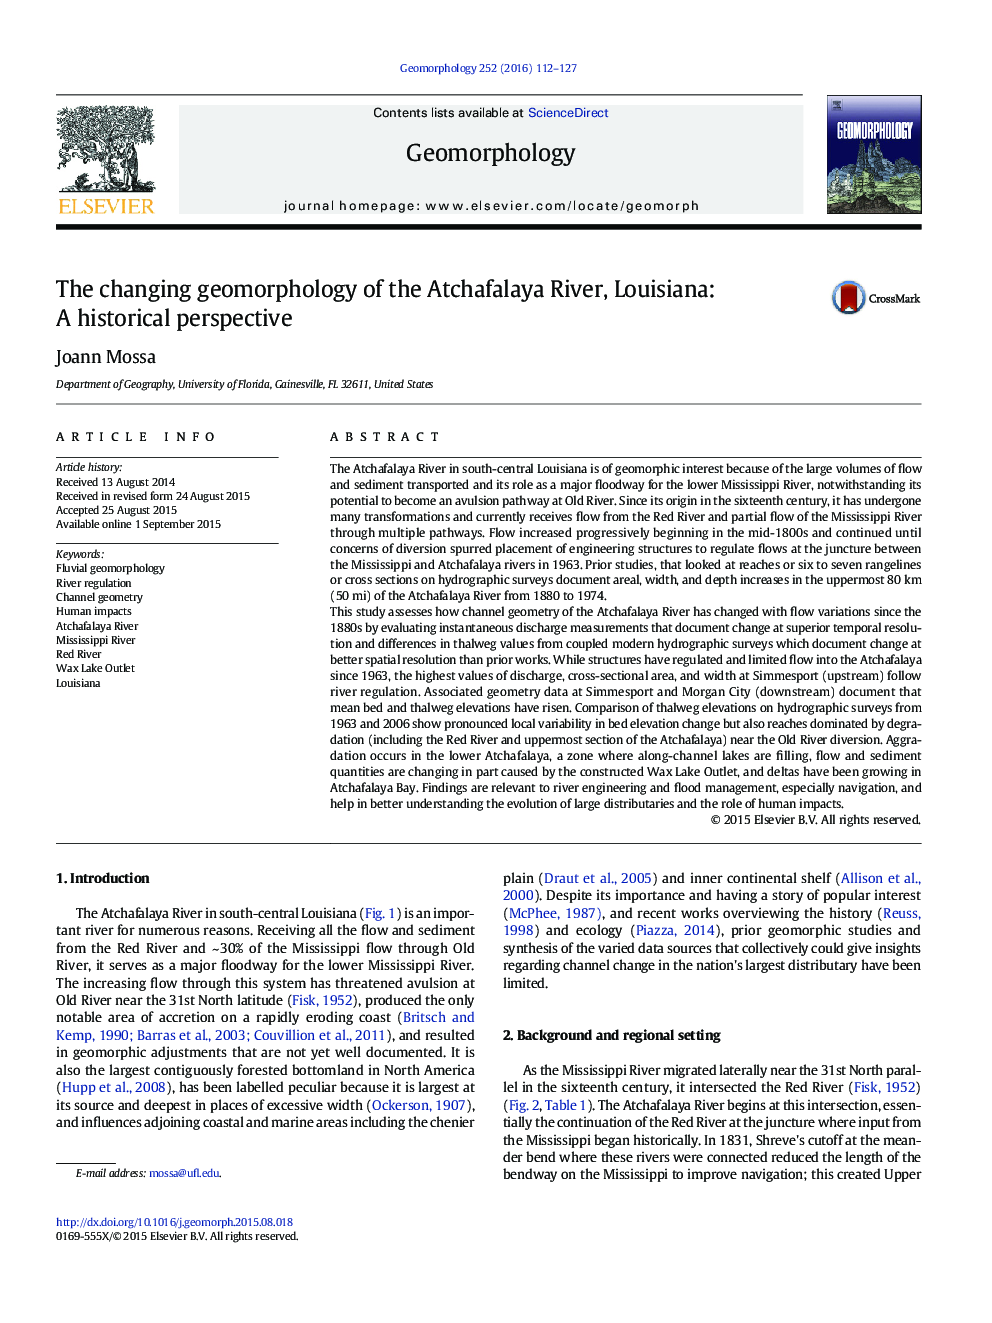 The changing geomorphology of the Atchafalaya River, Louisiana: A historical perspective